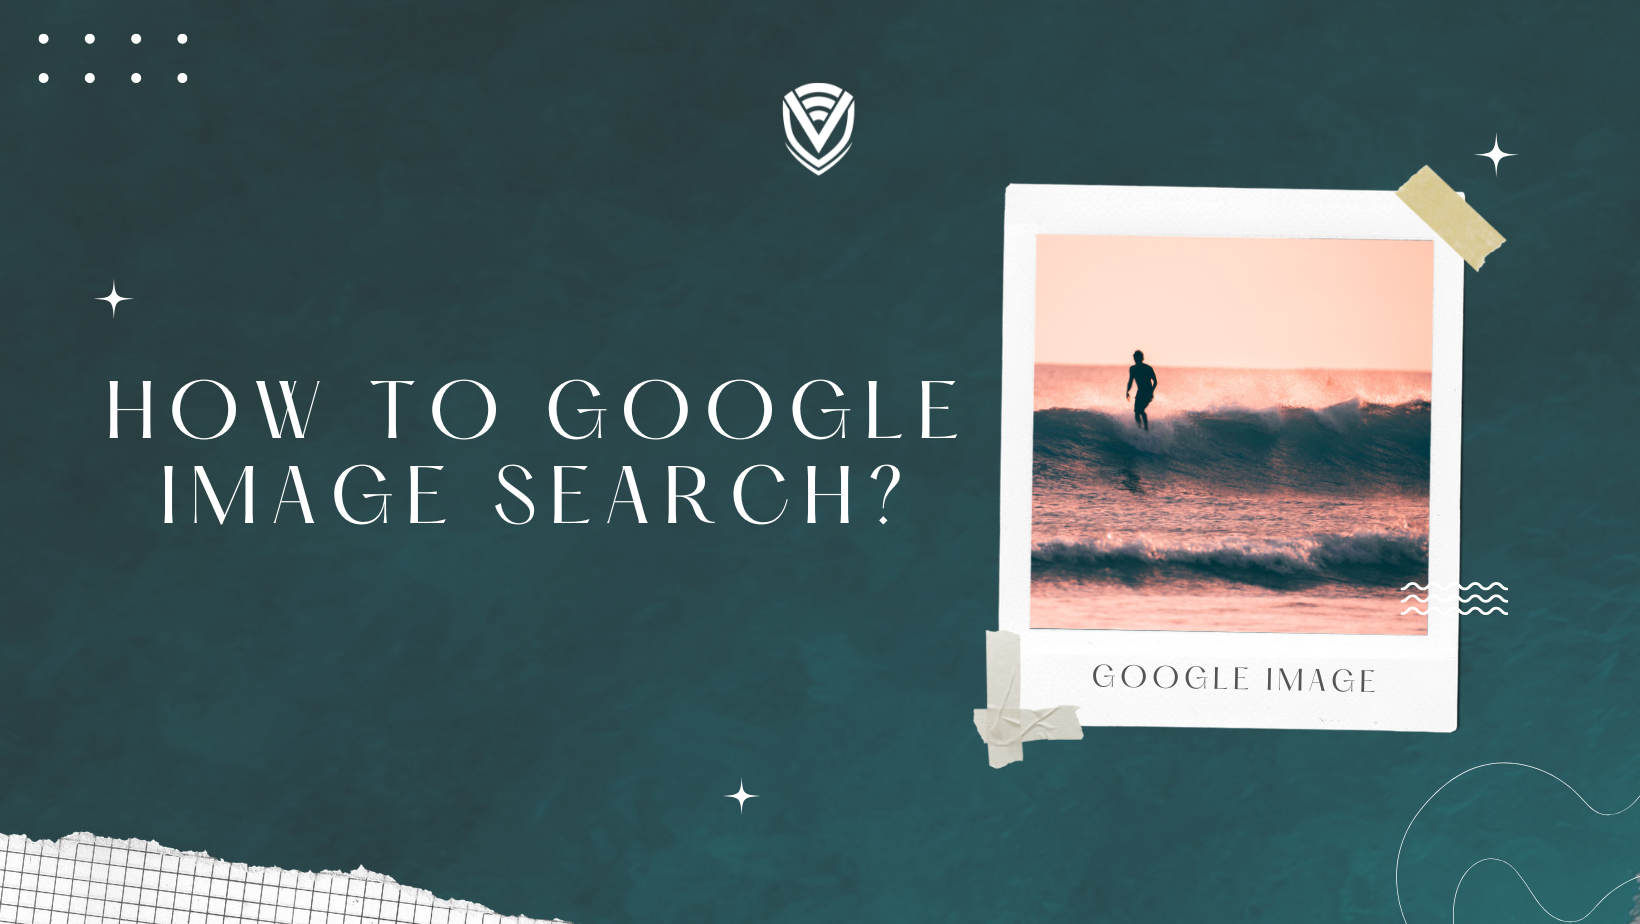 How to Google Image Search